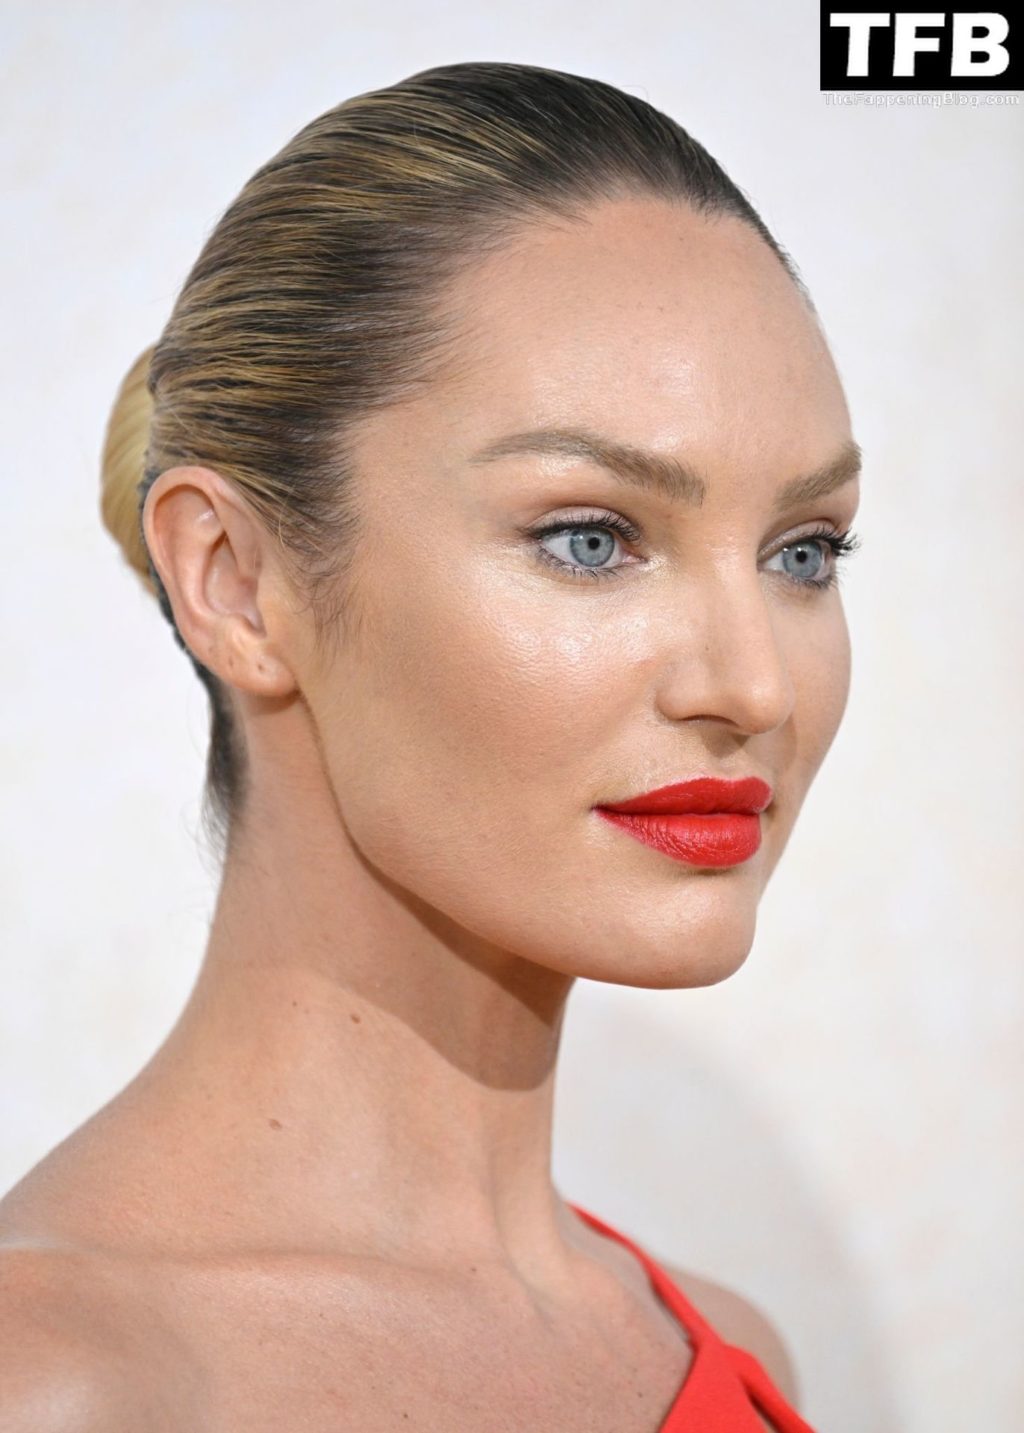 Candice Swanepoel Poses Braless in a Red Dress at the amfAR Gala Cannes 2022 in Cap d’Antibes (29 Photos)